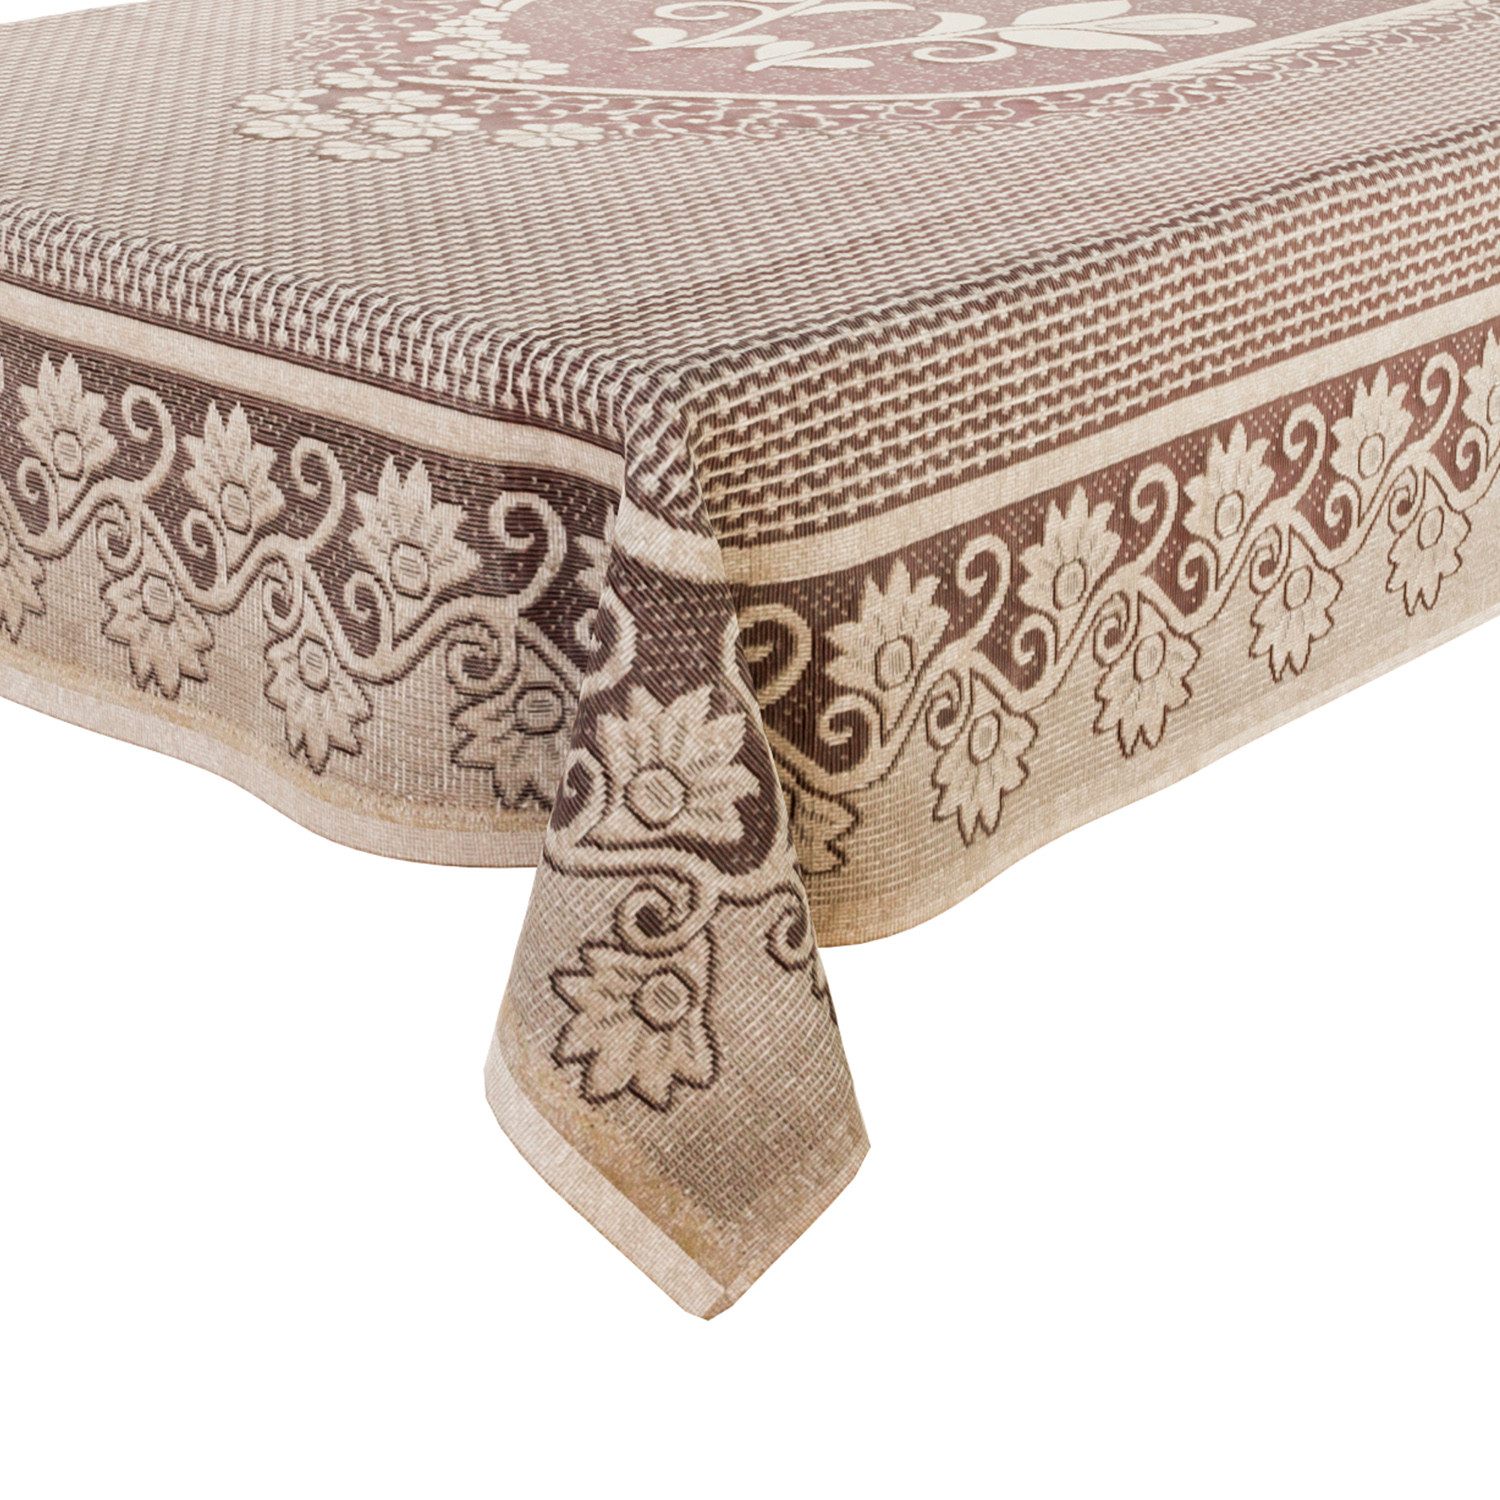 Kuber Industries Center Table Cover|Cotton Luxurious Net Floral S-19 Design|Stain-Resistant & Anti Skid Coffee Table Cover|40x60 Inch (Maroon)